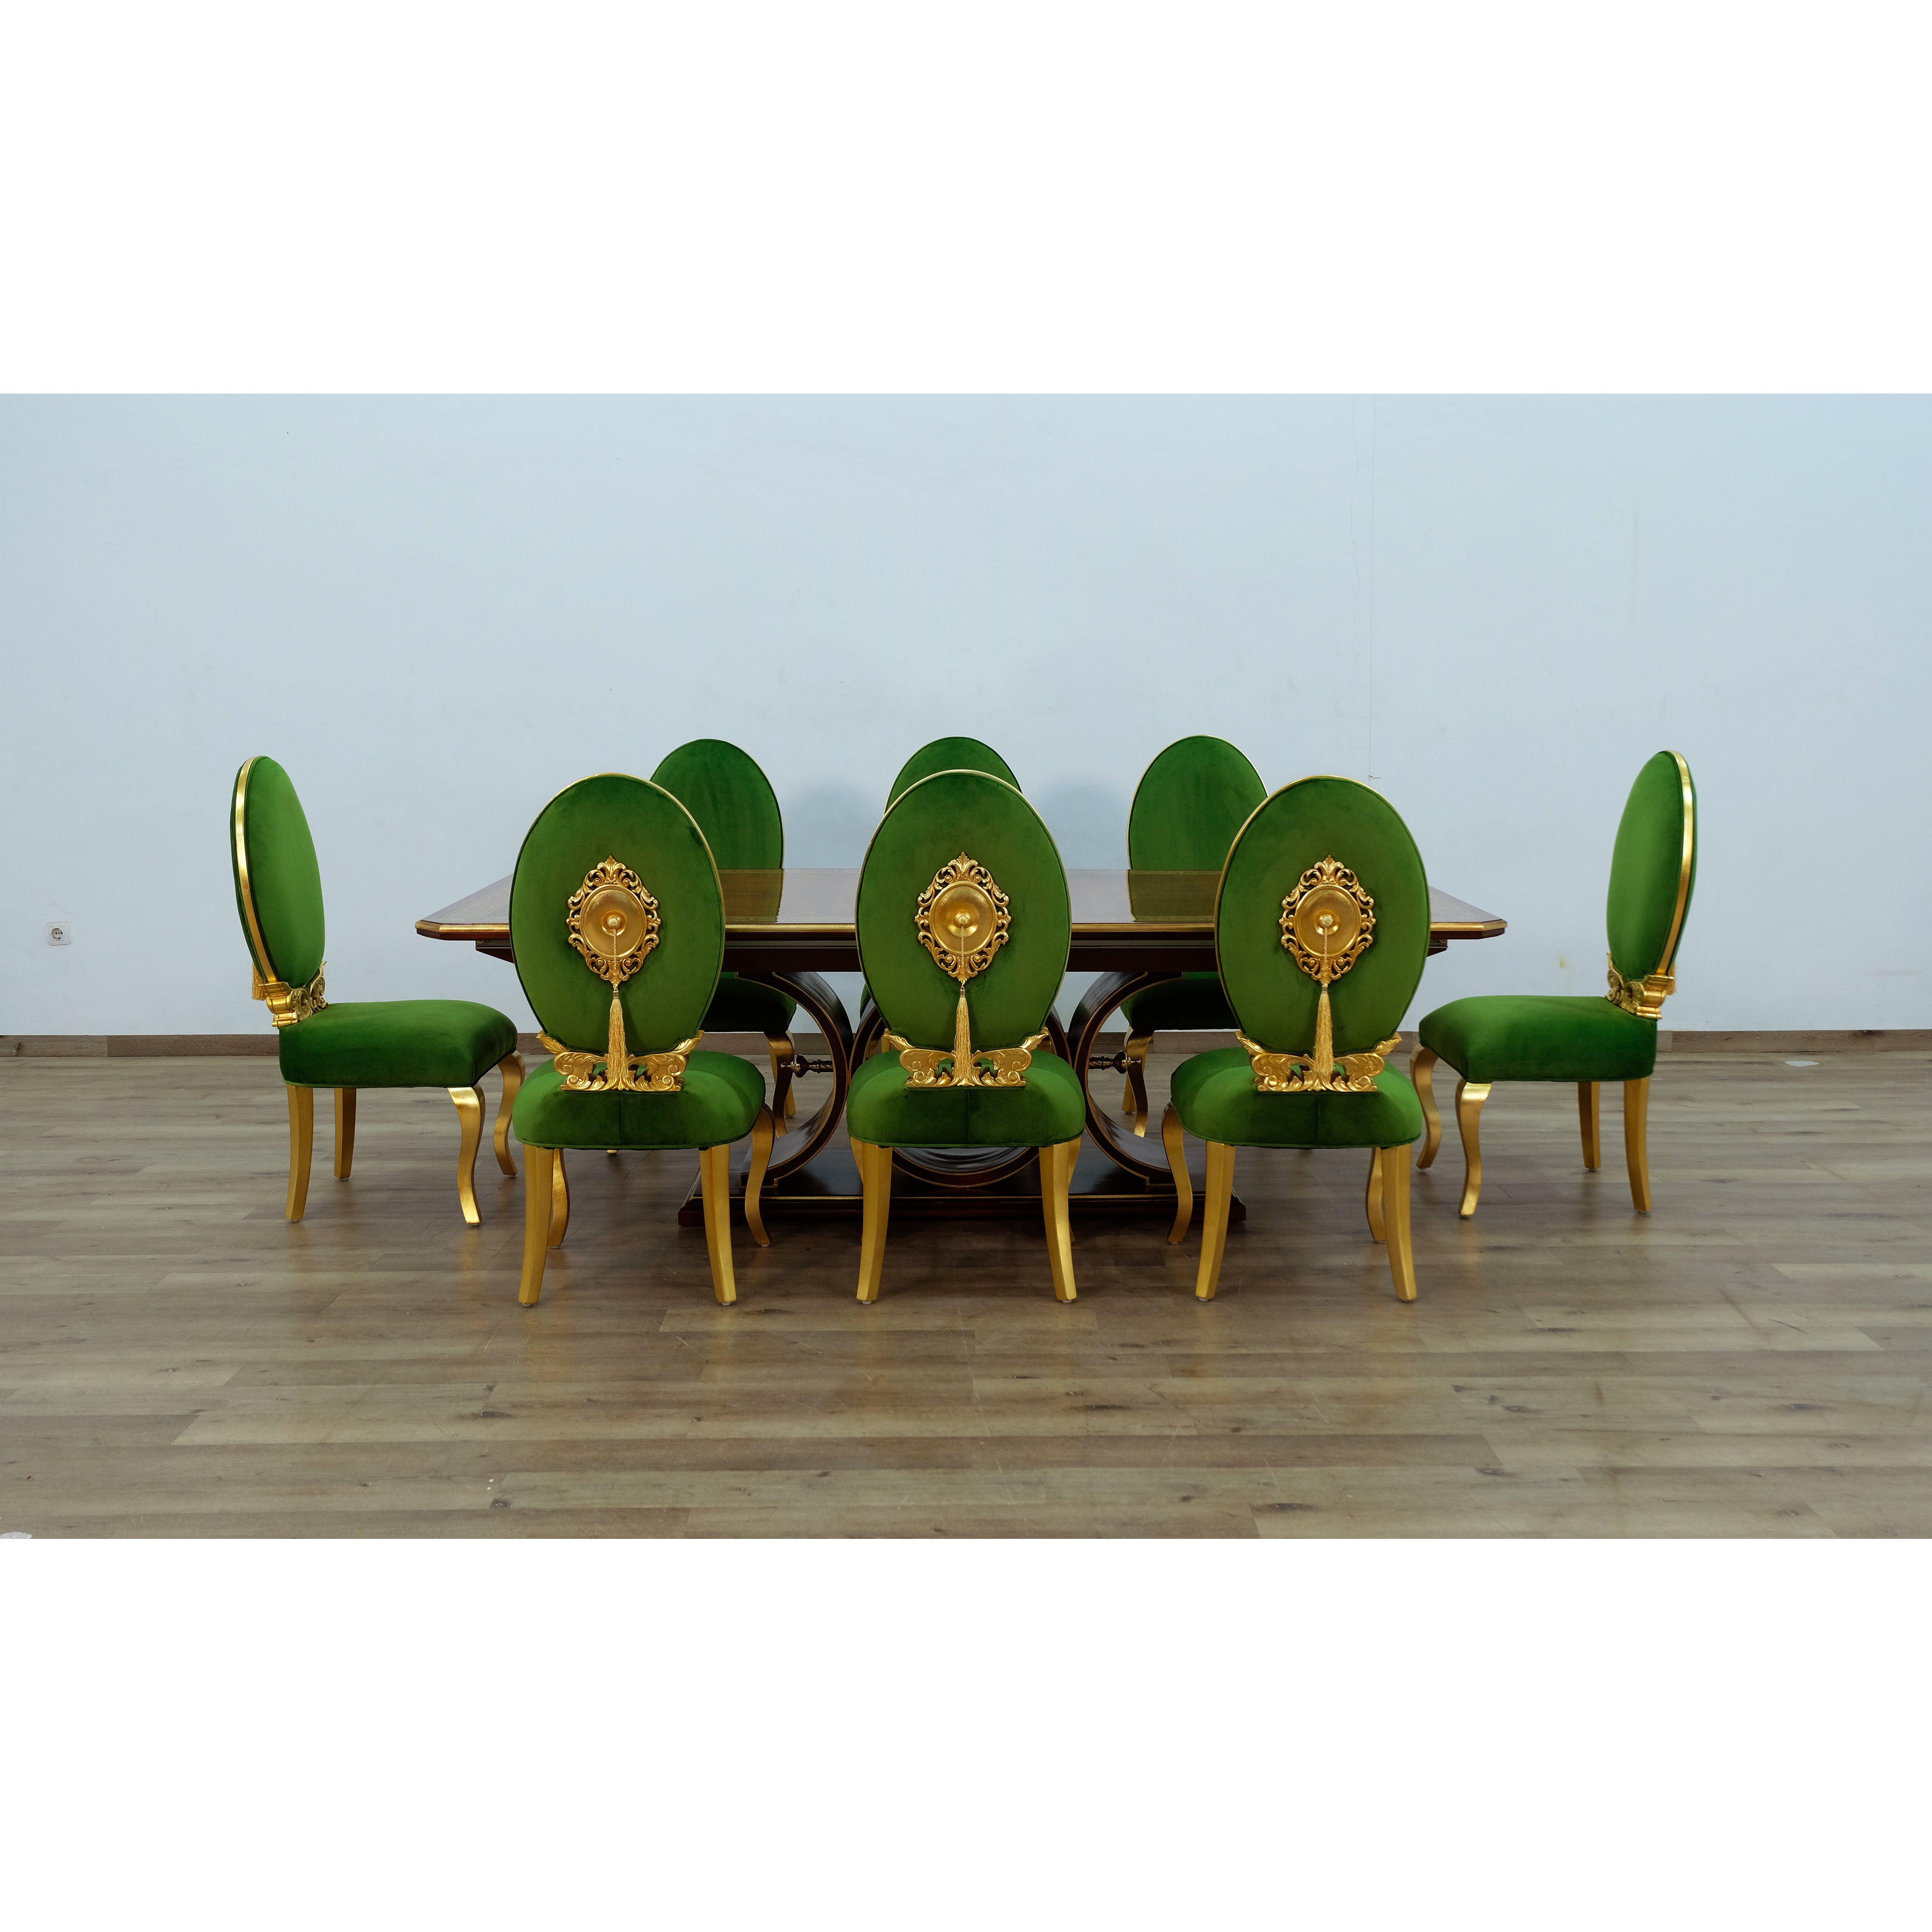 European Furniture - Rosella 9 Piece Dining Room Set With Emerald Green Chair - 44697-9SE-G - New Star Living